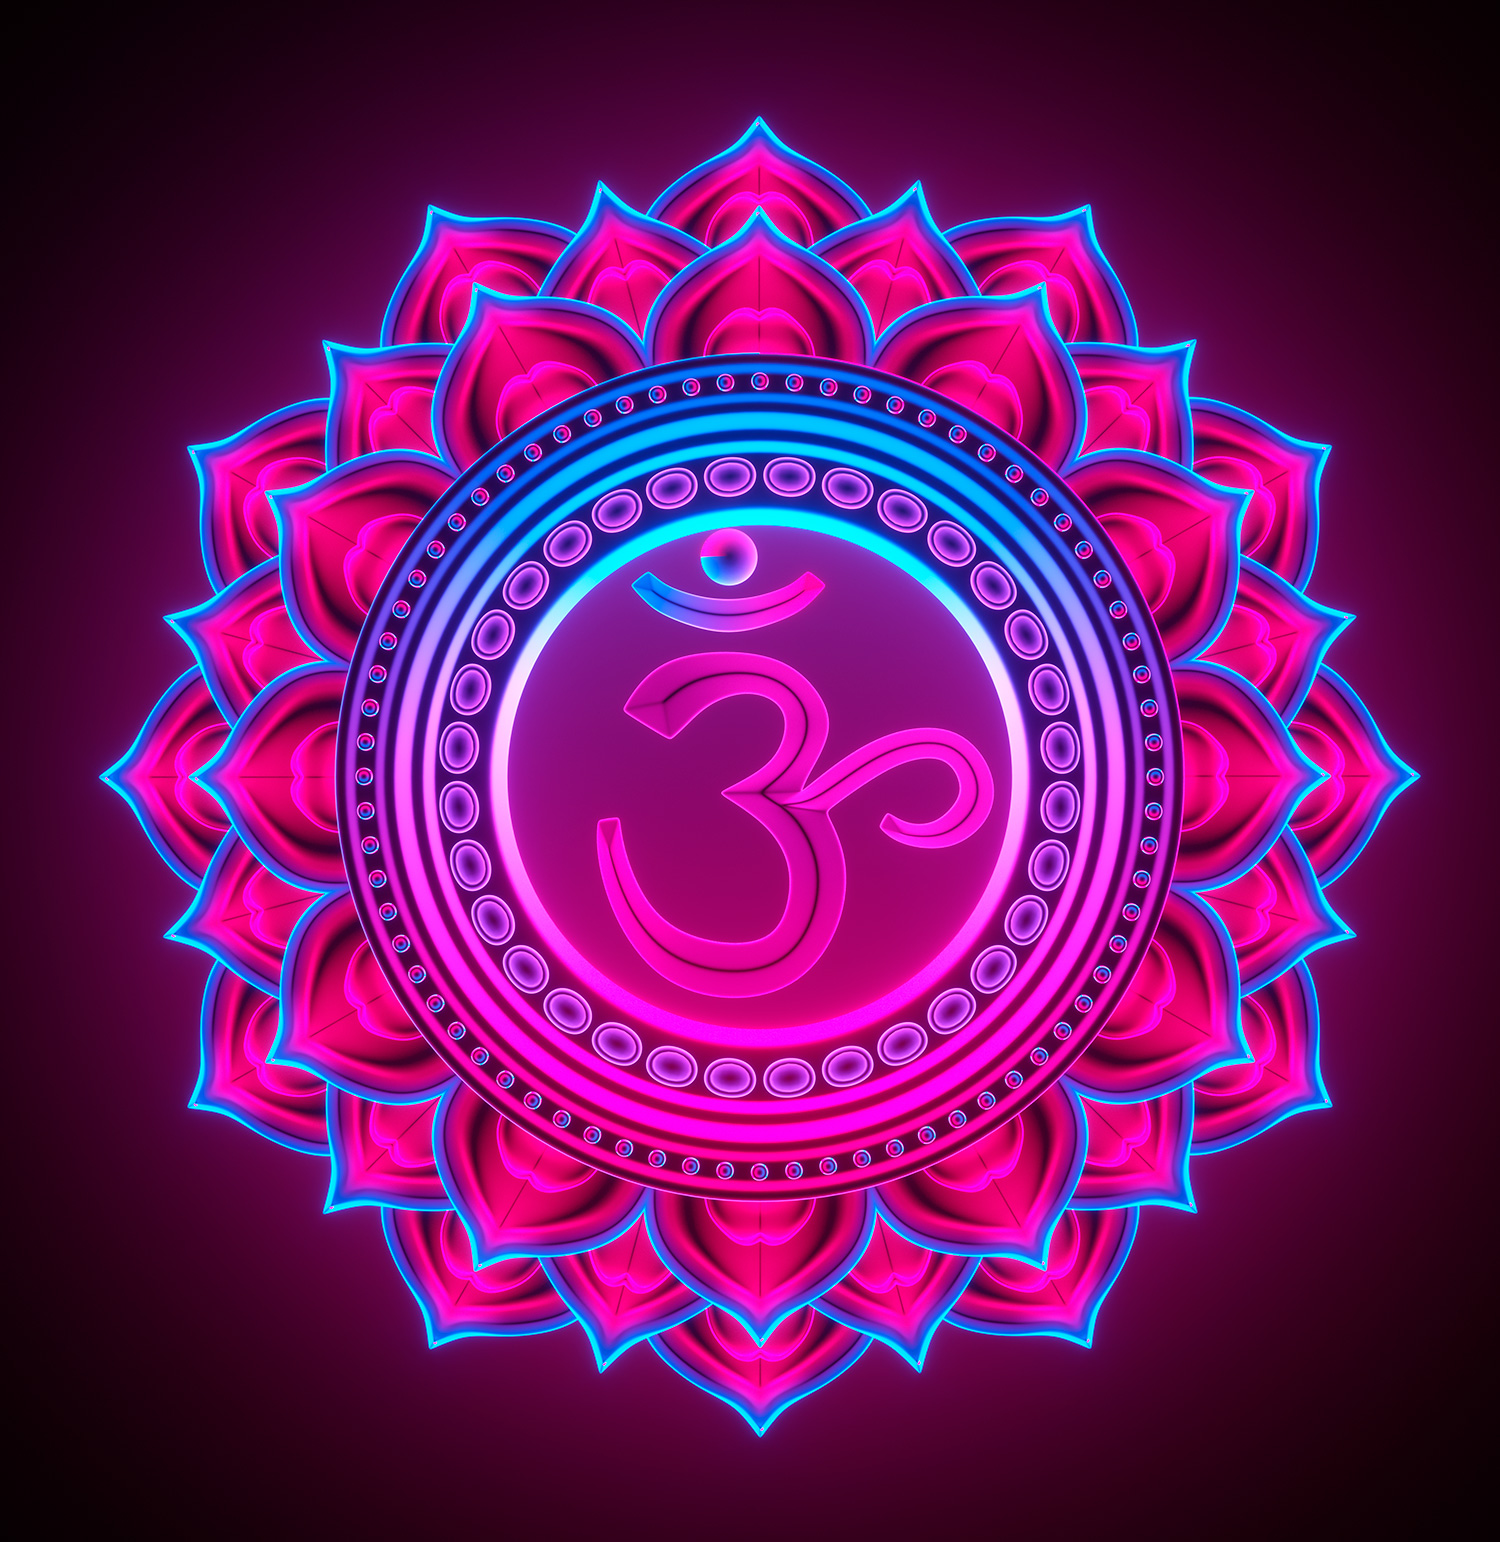 All About The Om Symbol